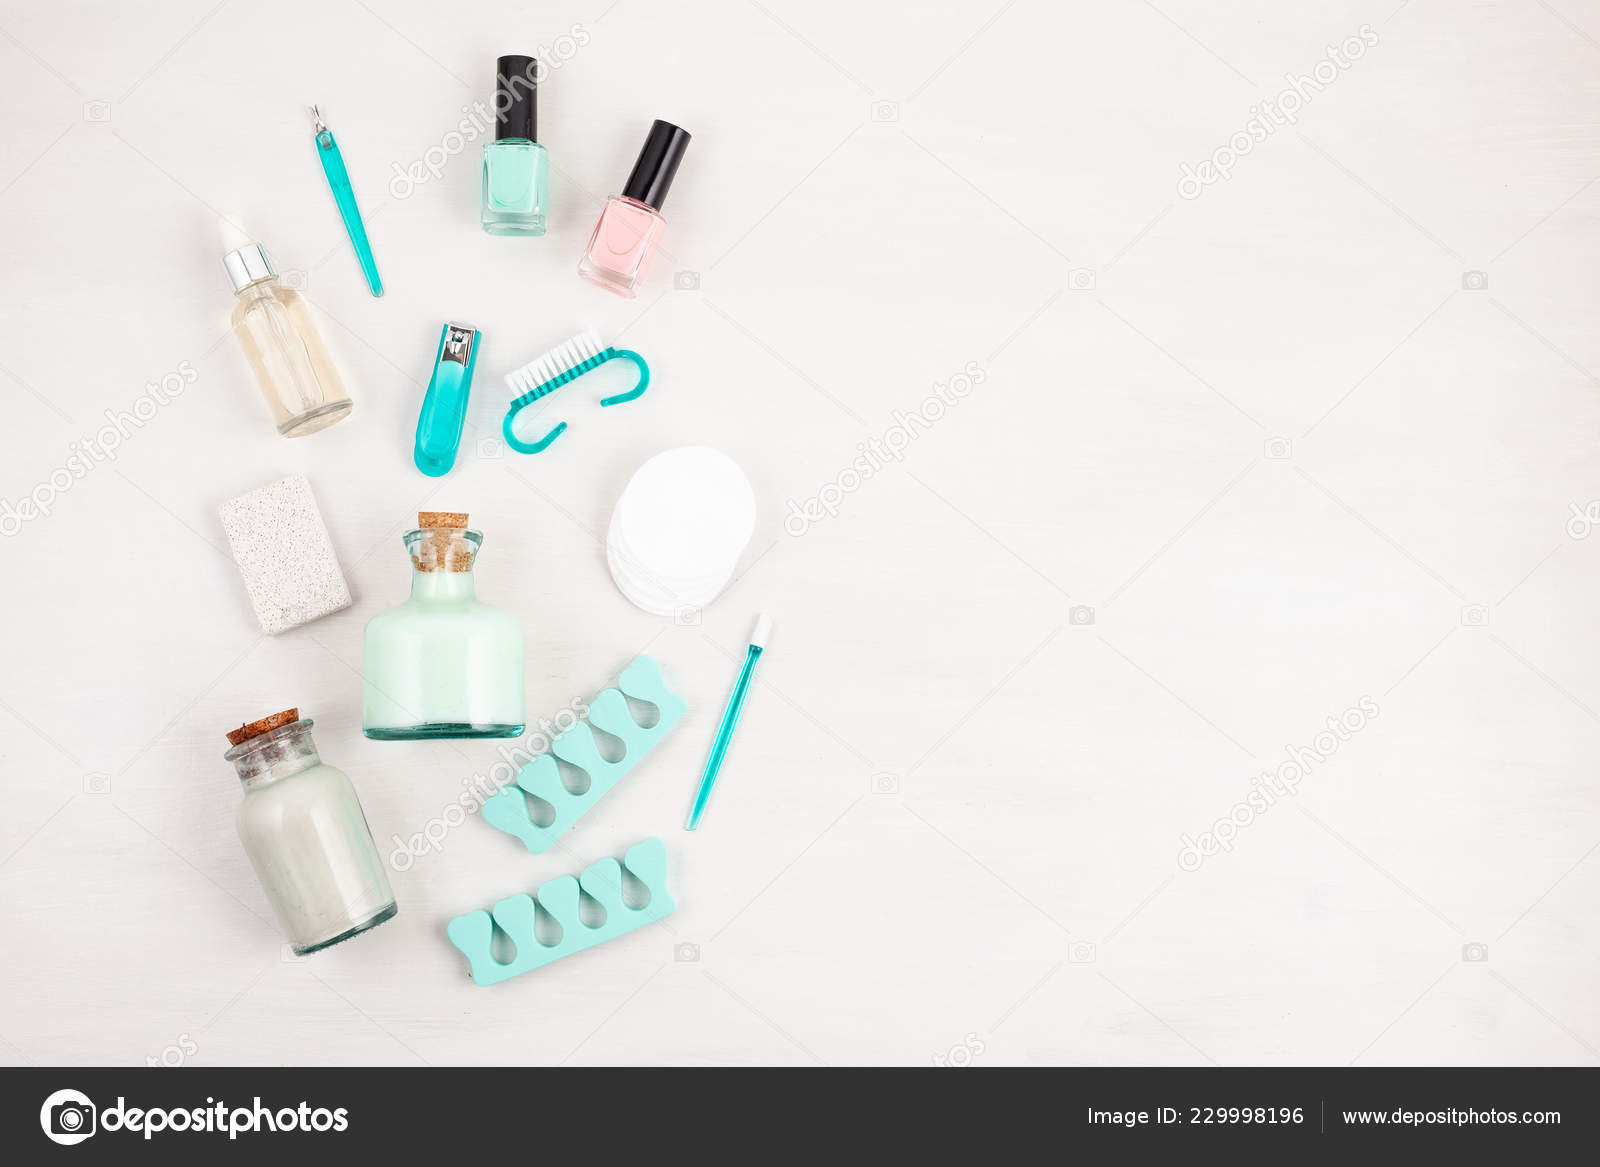 Download Mockup Beauty Cosmetic Products Manicure Pedicure Feet Hands Care Flat Stock Photo Image By C Netrun78 229998196